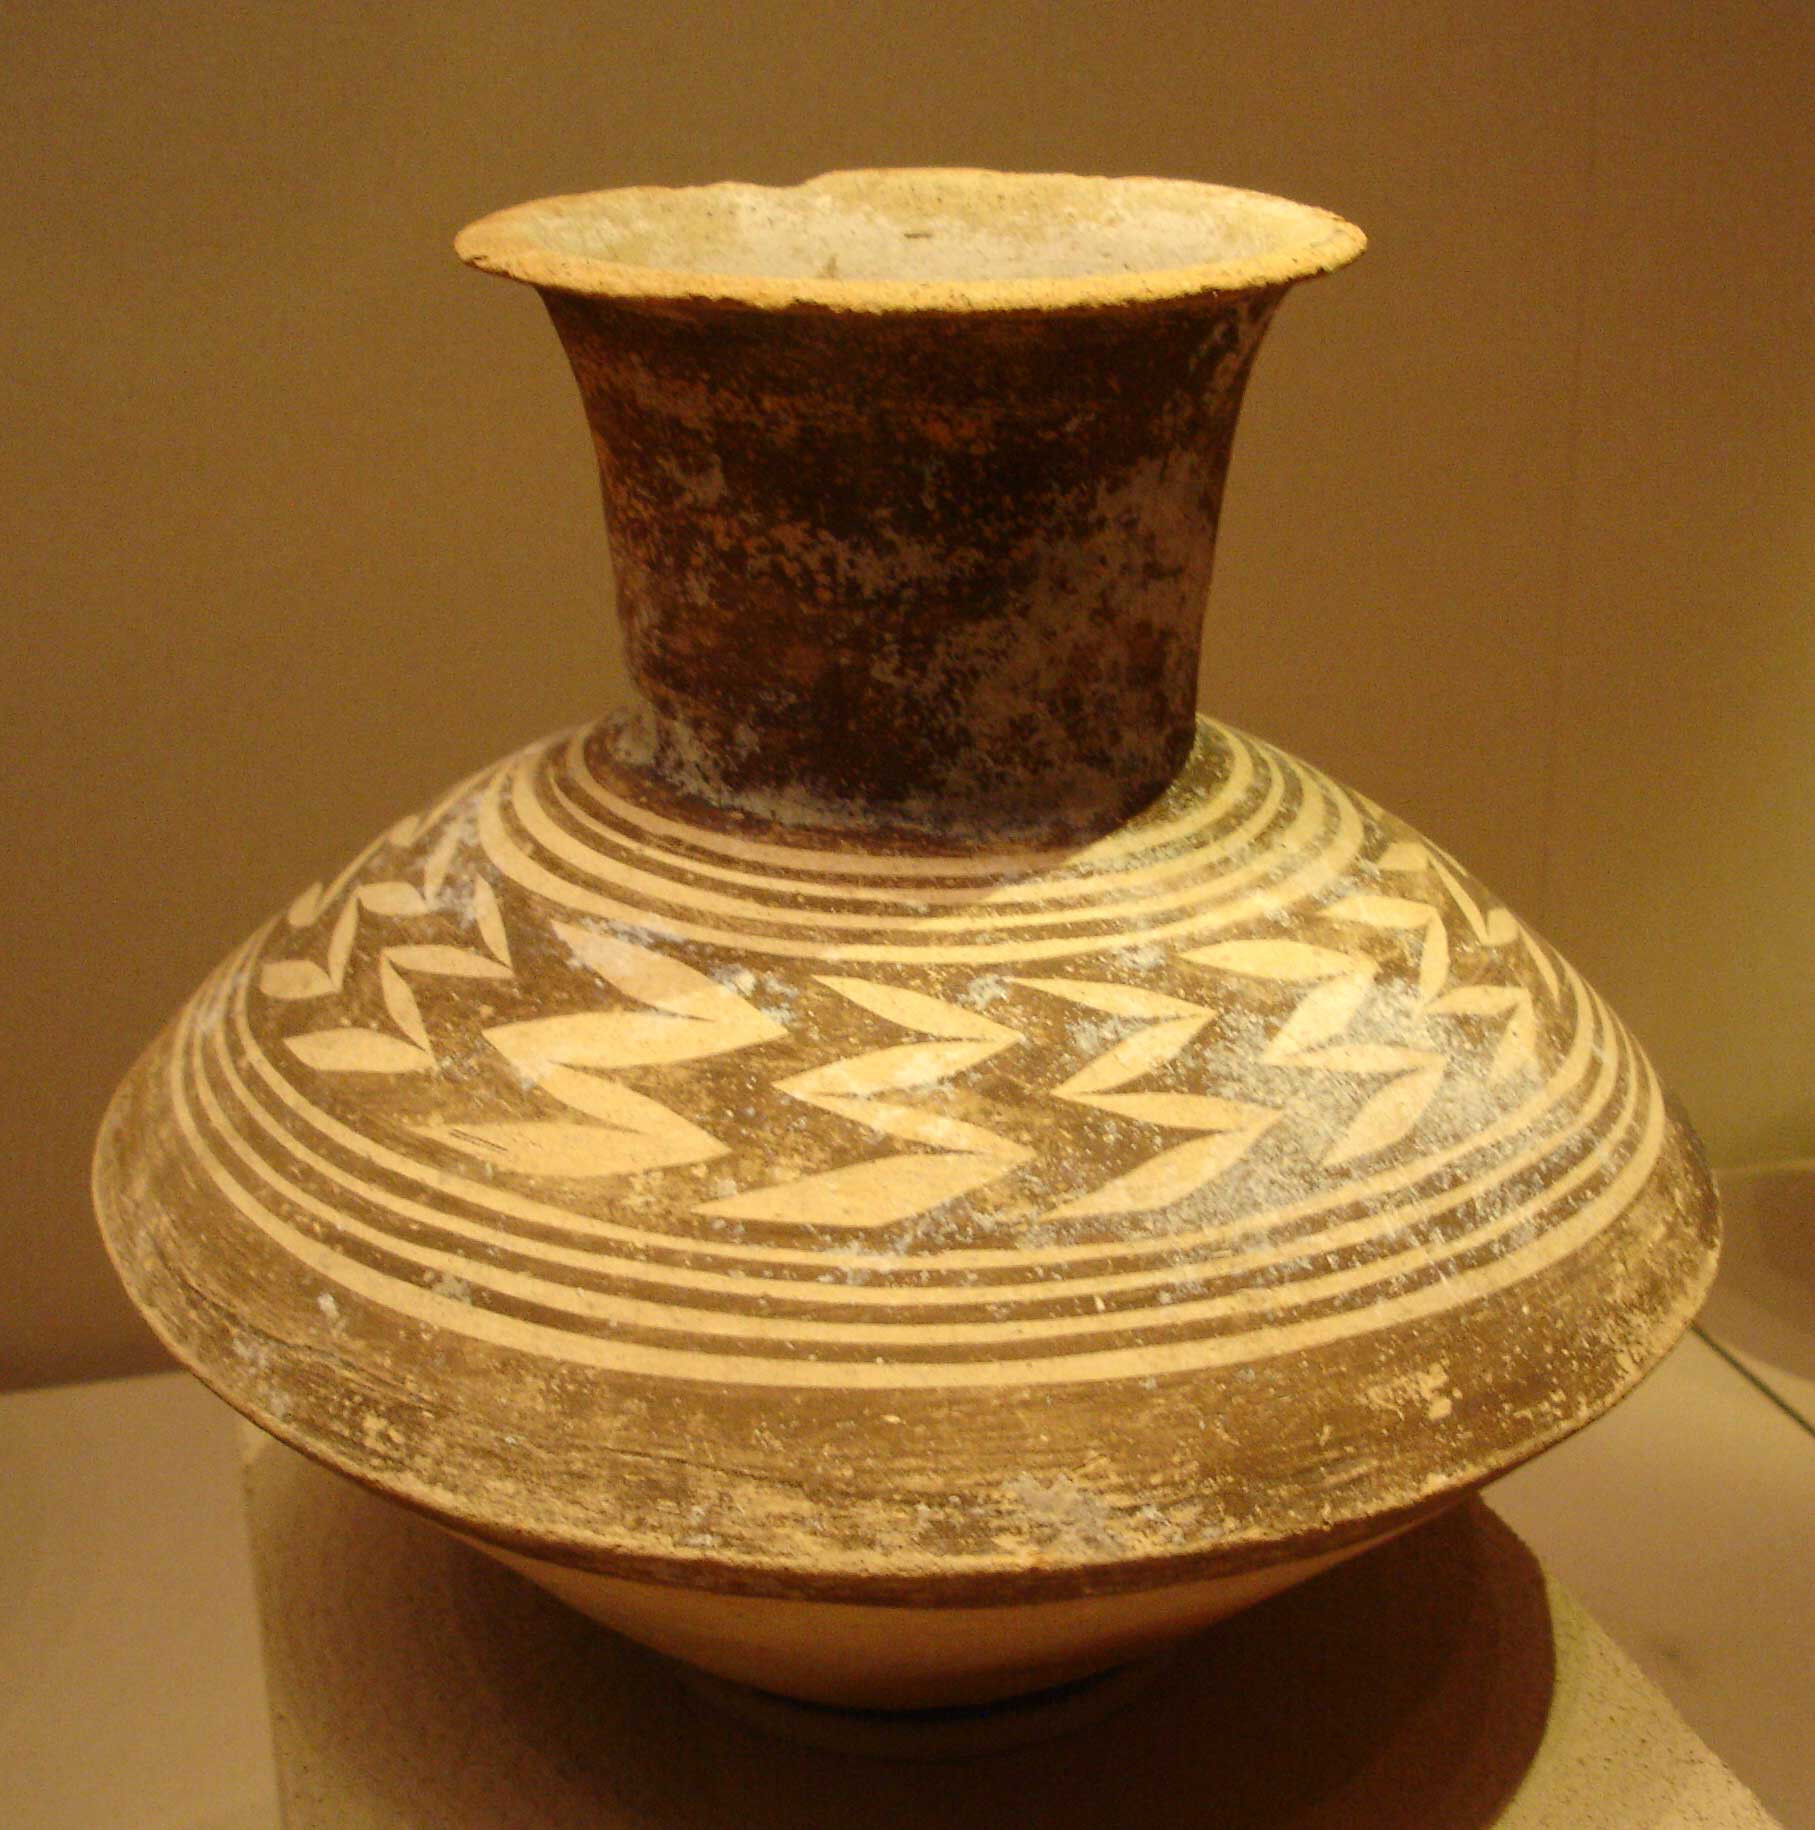 13 Recommended Abingdon Usa Pottery Vase 2024 free download abingdon usa pottery vase of early civilizations article khan academy within af4494bf3097a93350d0cf49eb52baa23a31216b